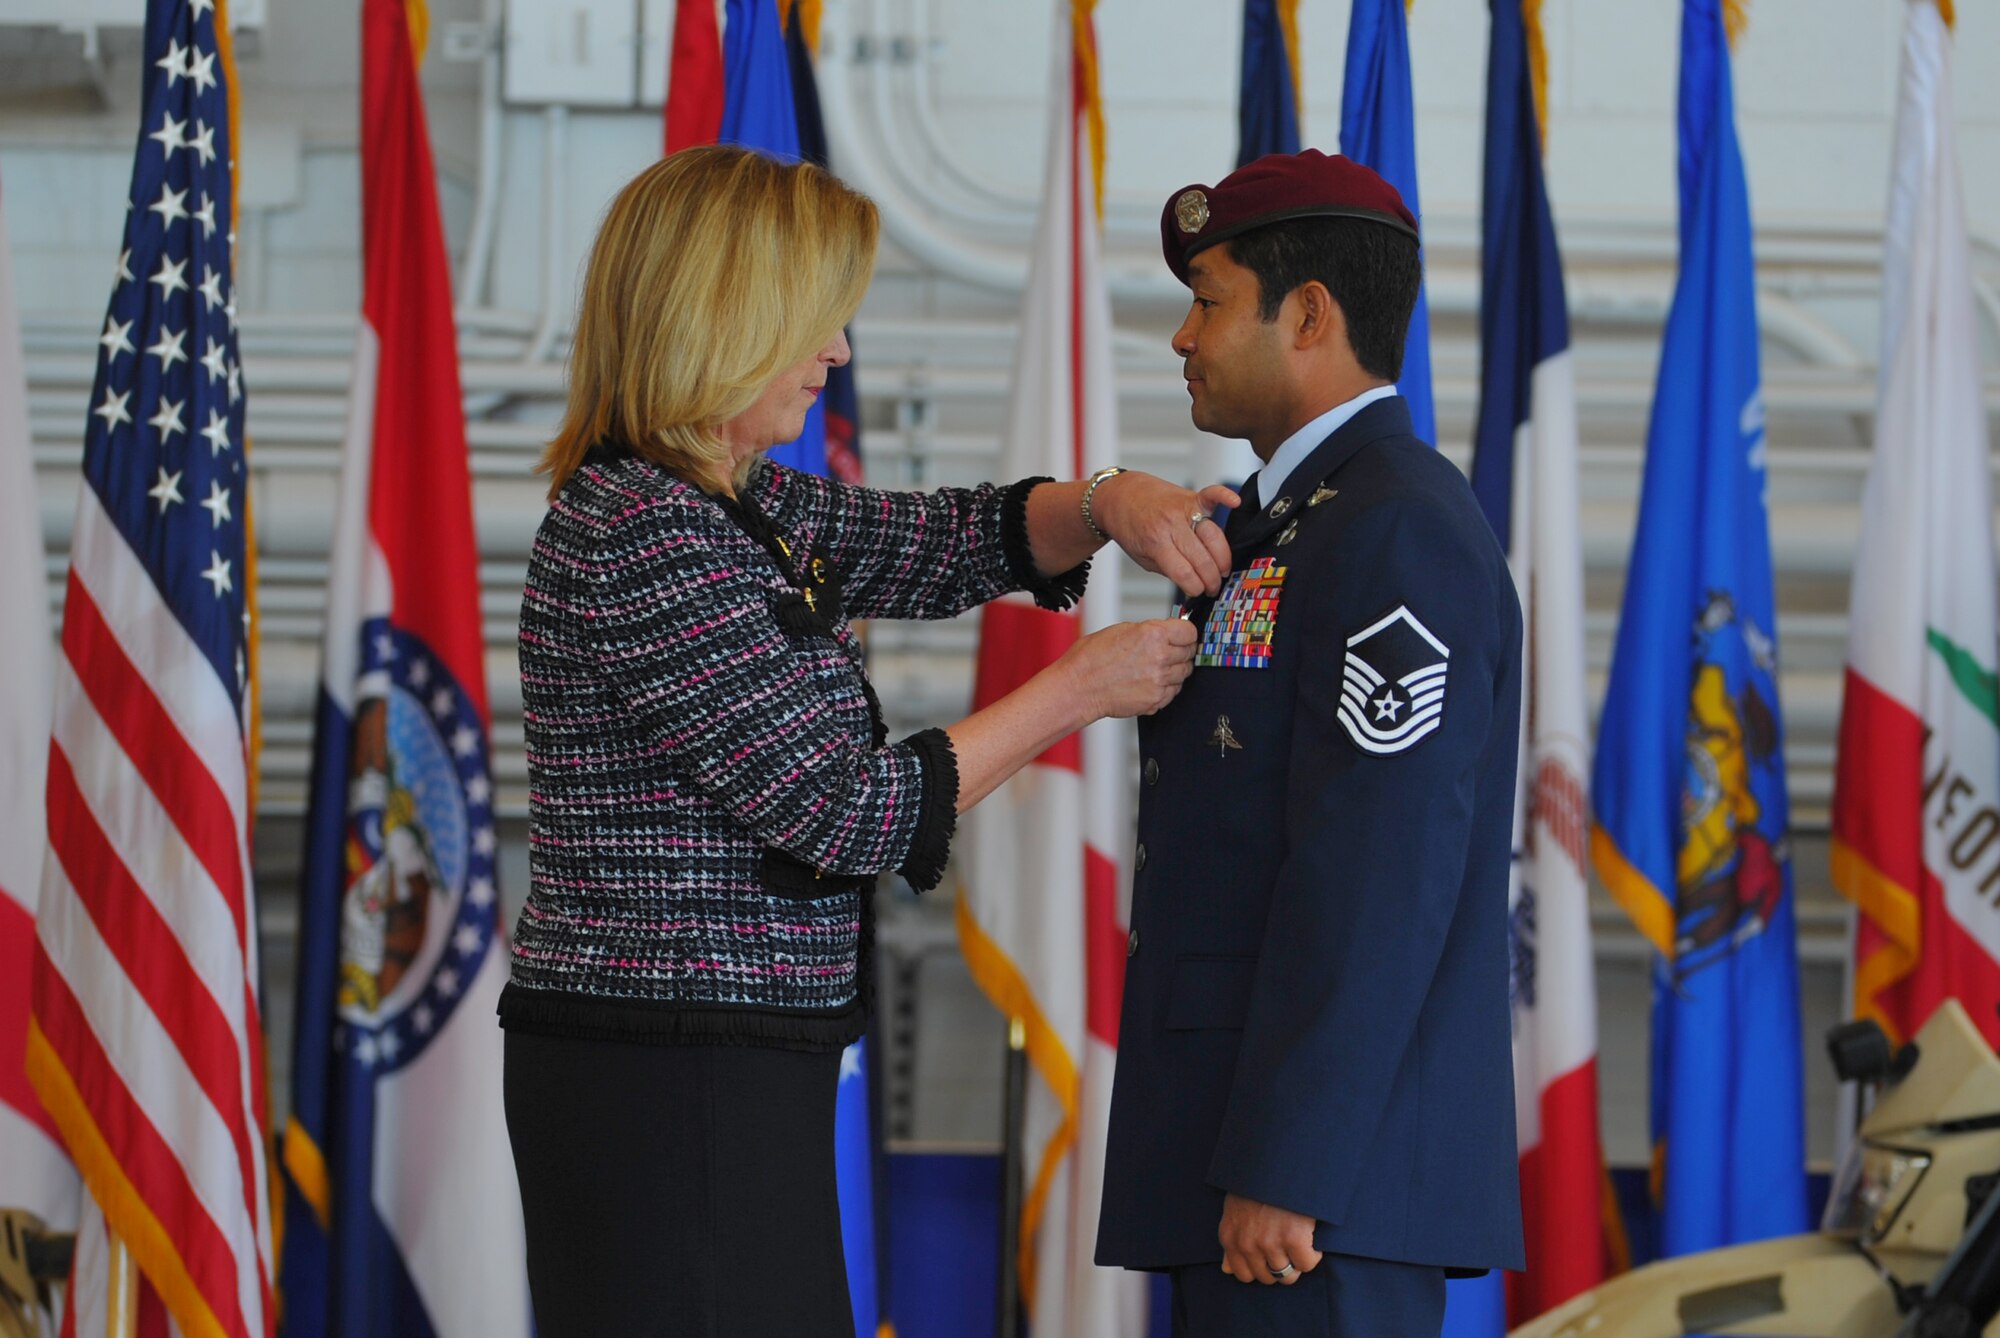 Secretary of the Air Force Deborah Lee James pins the Air Force Cross to the uniform of Master Sgt. Ivan Ruiz, a pararescueman from the 56th Rescue Squadron, Royal Air Force Lakenheath, England, during a ceremony at the Freedom Hangar on Hurlburt Field, Fla., Dec. 17, 2014. While deployed to Afghanistan with the 22nd Expeditionary Special Tactics Squadron, Ruiz protected his injured special operations forces teammates with fire support and provided emergency medical care under intense enemy fire in the dark, Dec. 10, 2013. The last six Air Force Crosses have all been awarded to AFSOC Special Tactics Airmen. (U.S. Air Force photo/Senior Airman Christopher Callaway) 